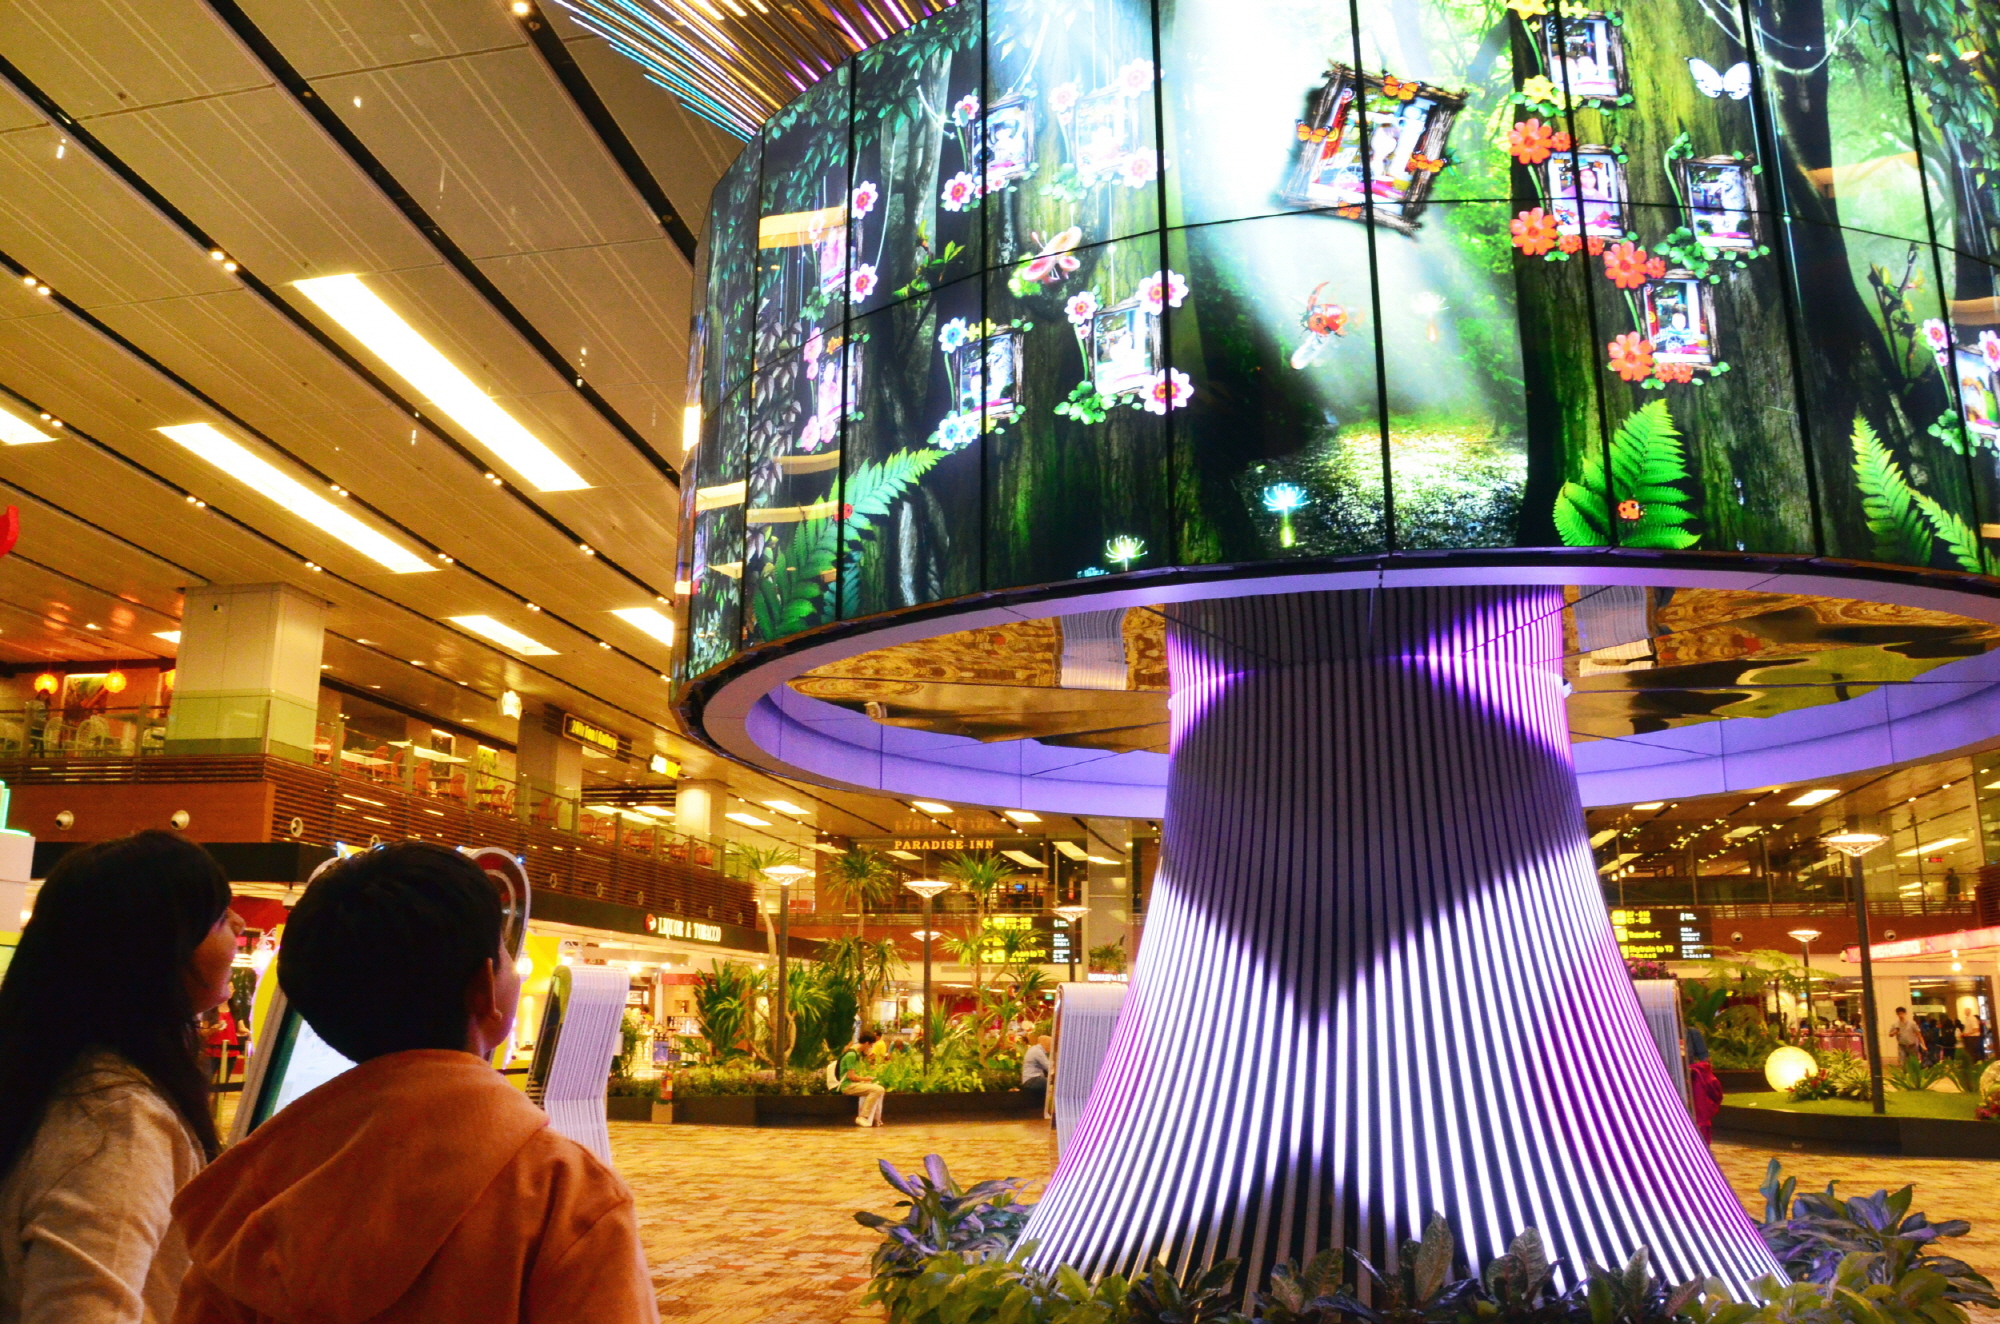 Travelers watch the vivid imagery of LG’s 64 47WV30 displays within the Social Tree installation at Changi Airport’s Terminal One